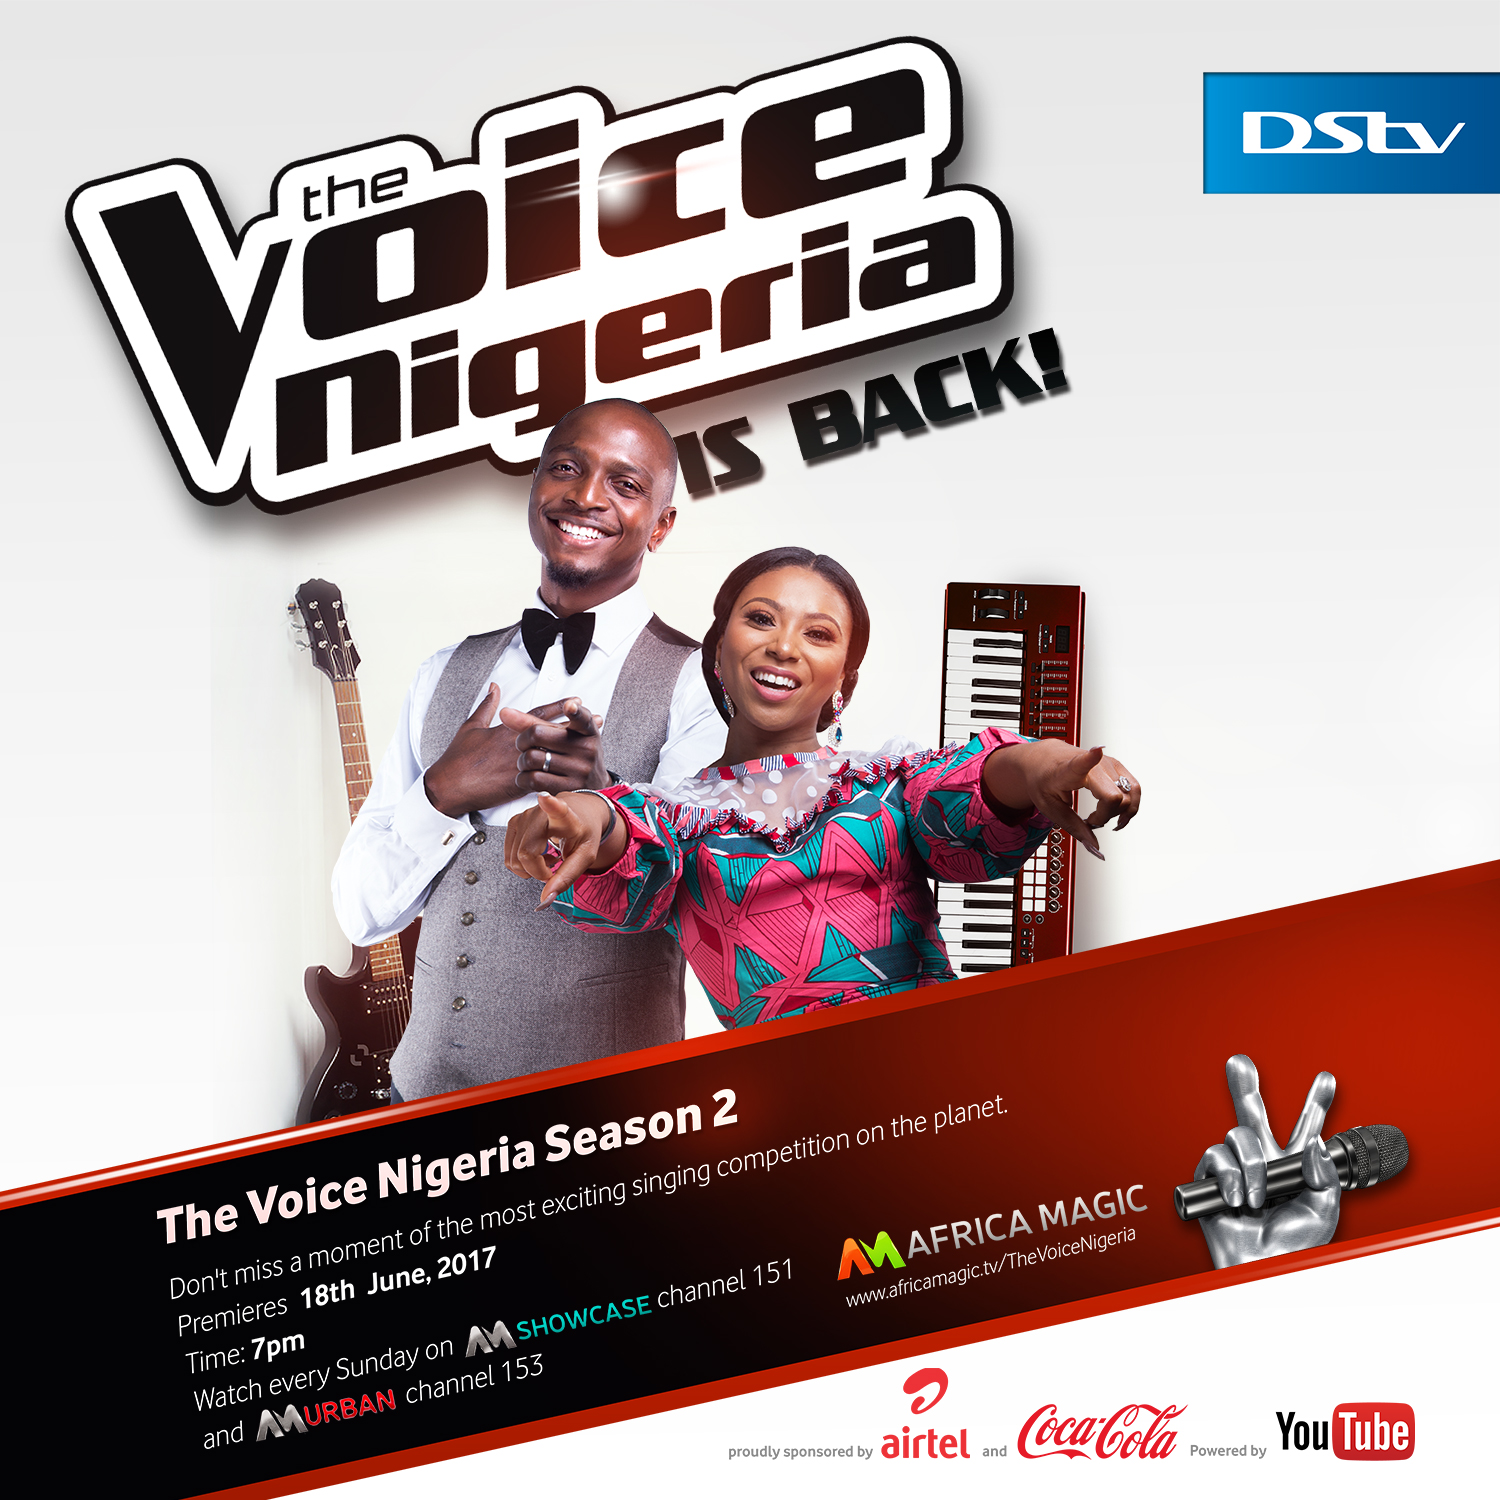 The Voice Nigeria Season 2 Airs from June 18